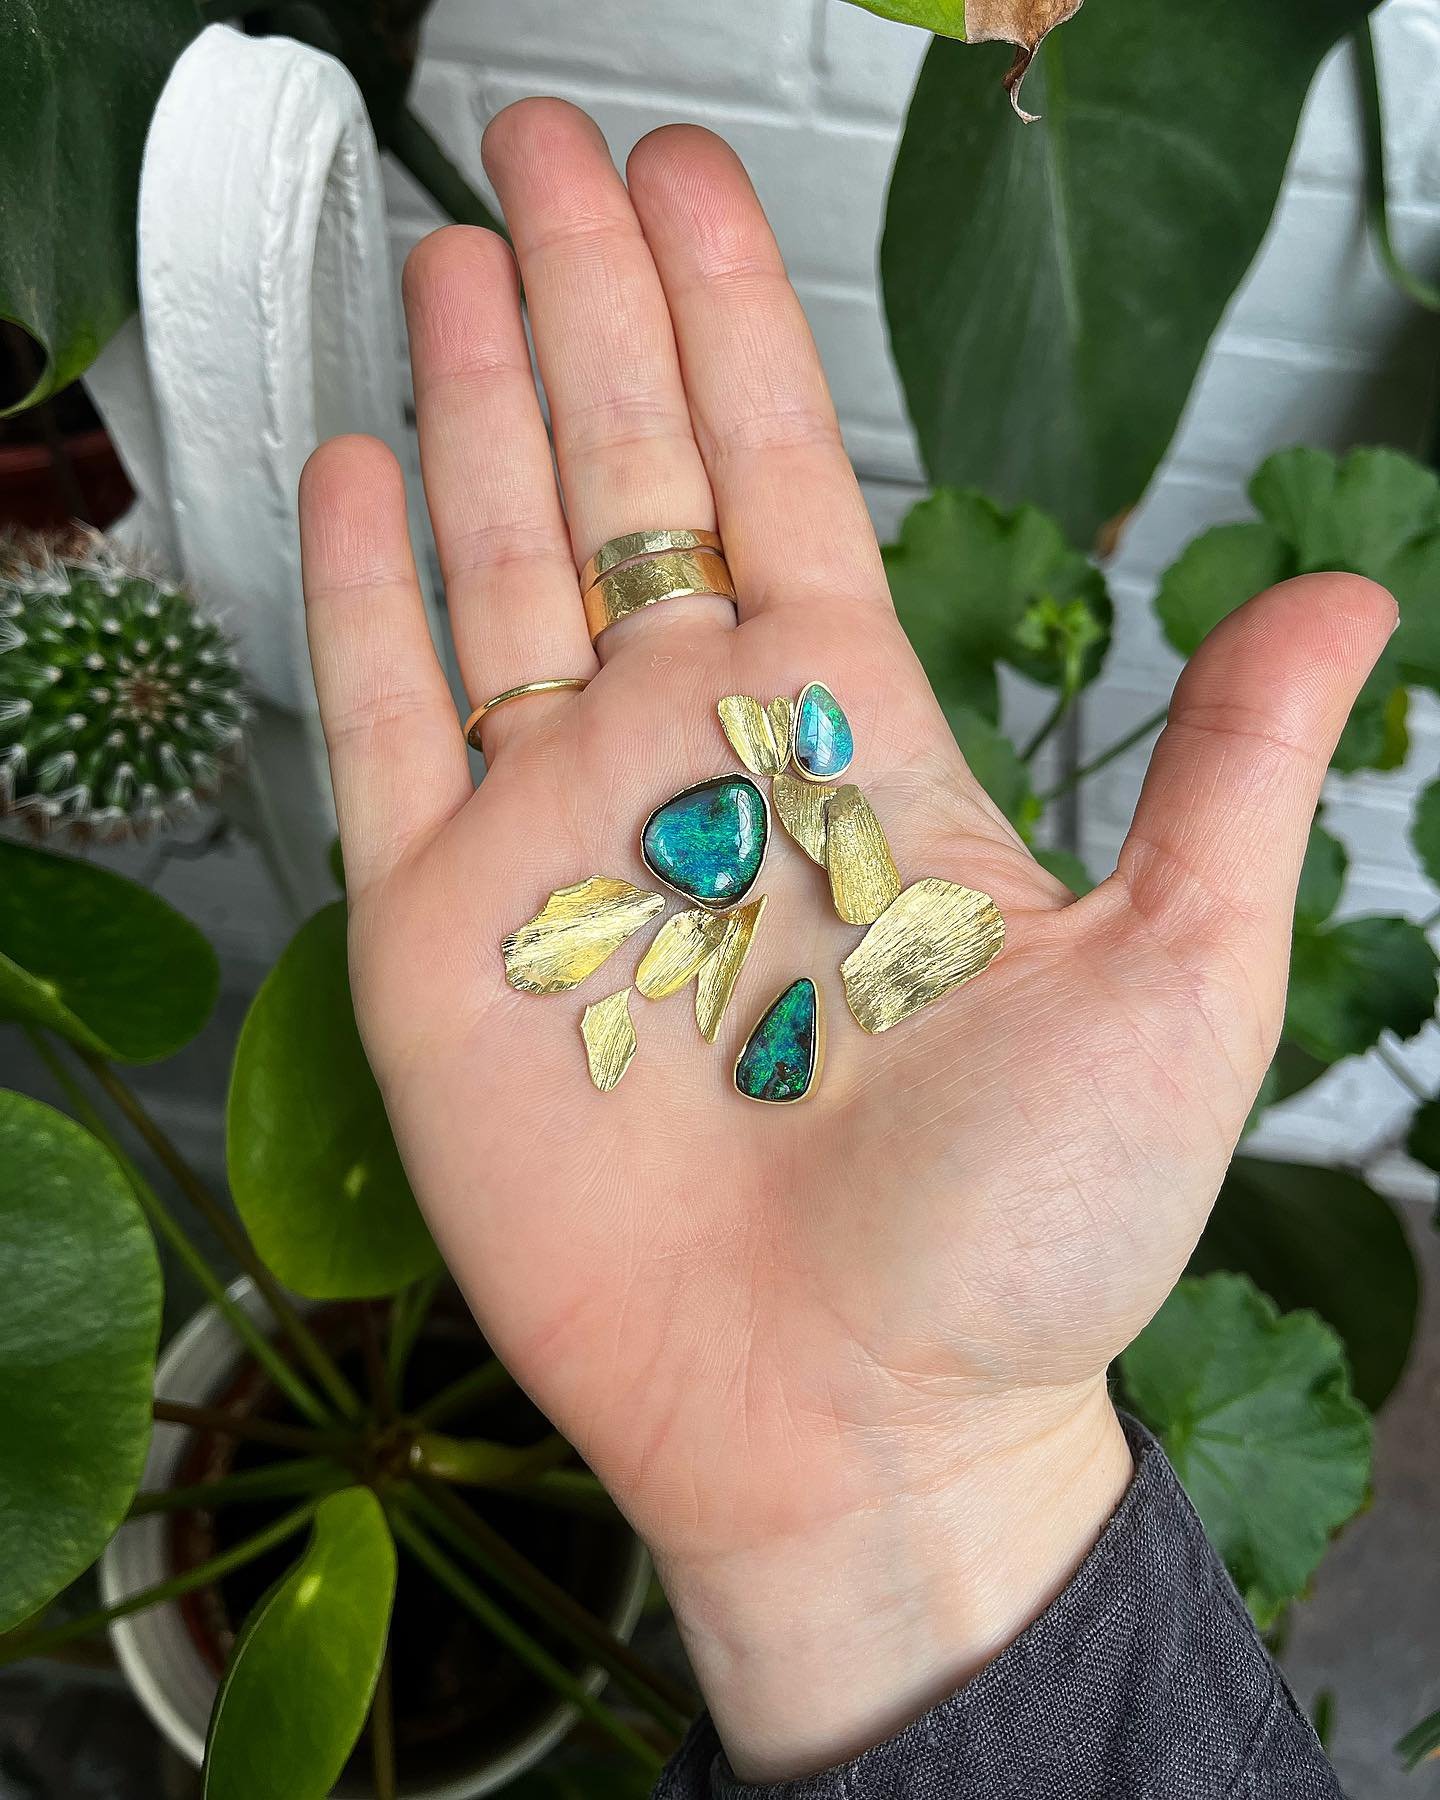 A lovely day in the studio working on my favourite projects. Lots of interesting boulder opals from Australia with all the details from my sketchbook coming to life. I&rsquo;m excited to share soon some of the new additions to The Jewel Nouveau Colle